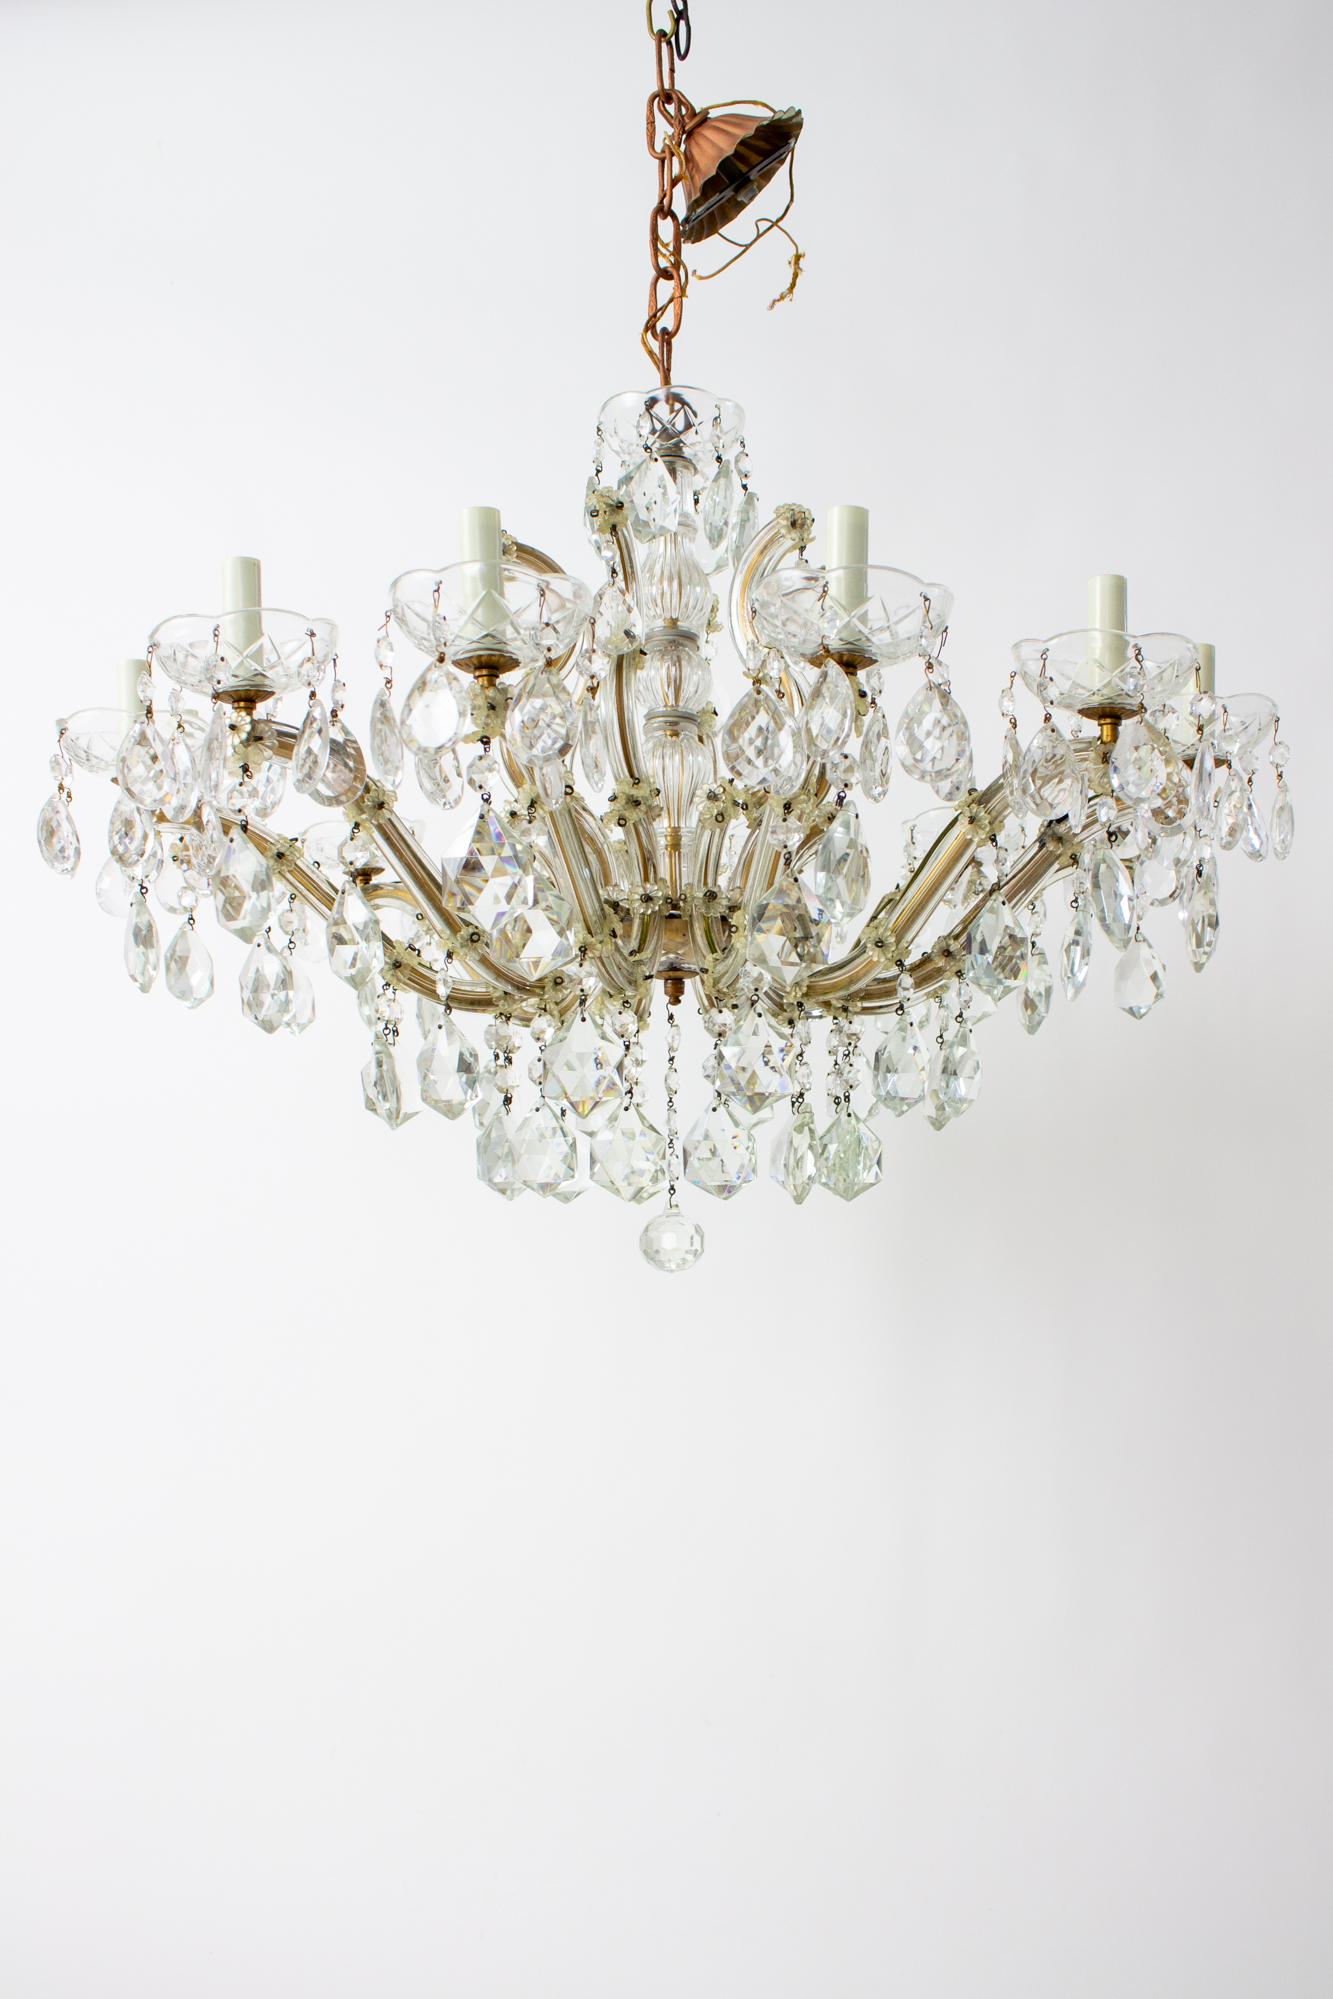 Mid 20th Century Maria Theresa chandelier. According to lore, the Maria Theresa Chandelier was designed for the Czech coronation of Empress Maria Theresa in 1743. She was so enthralled that she had more made for her Viennese palace and the